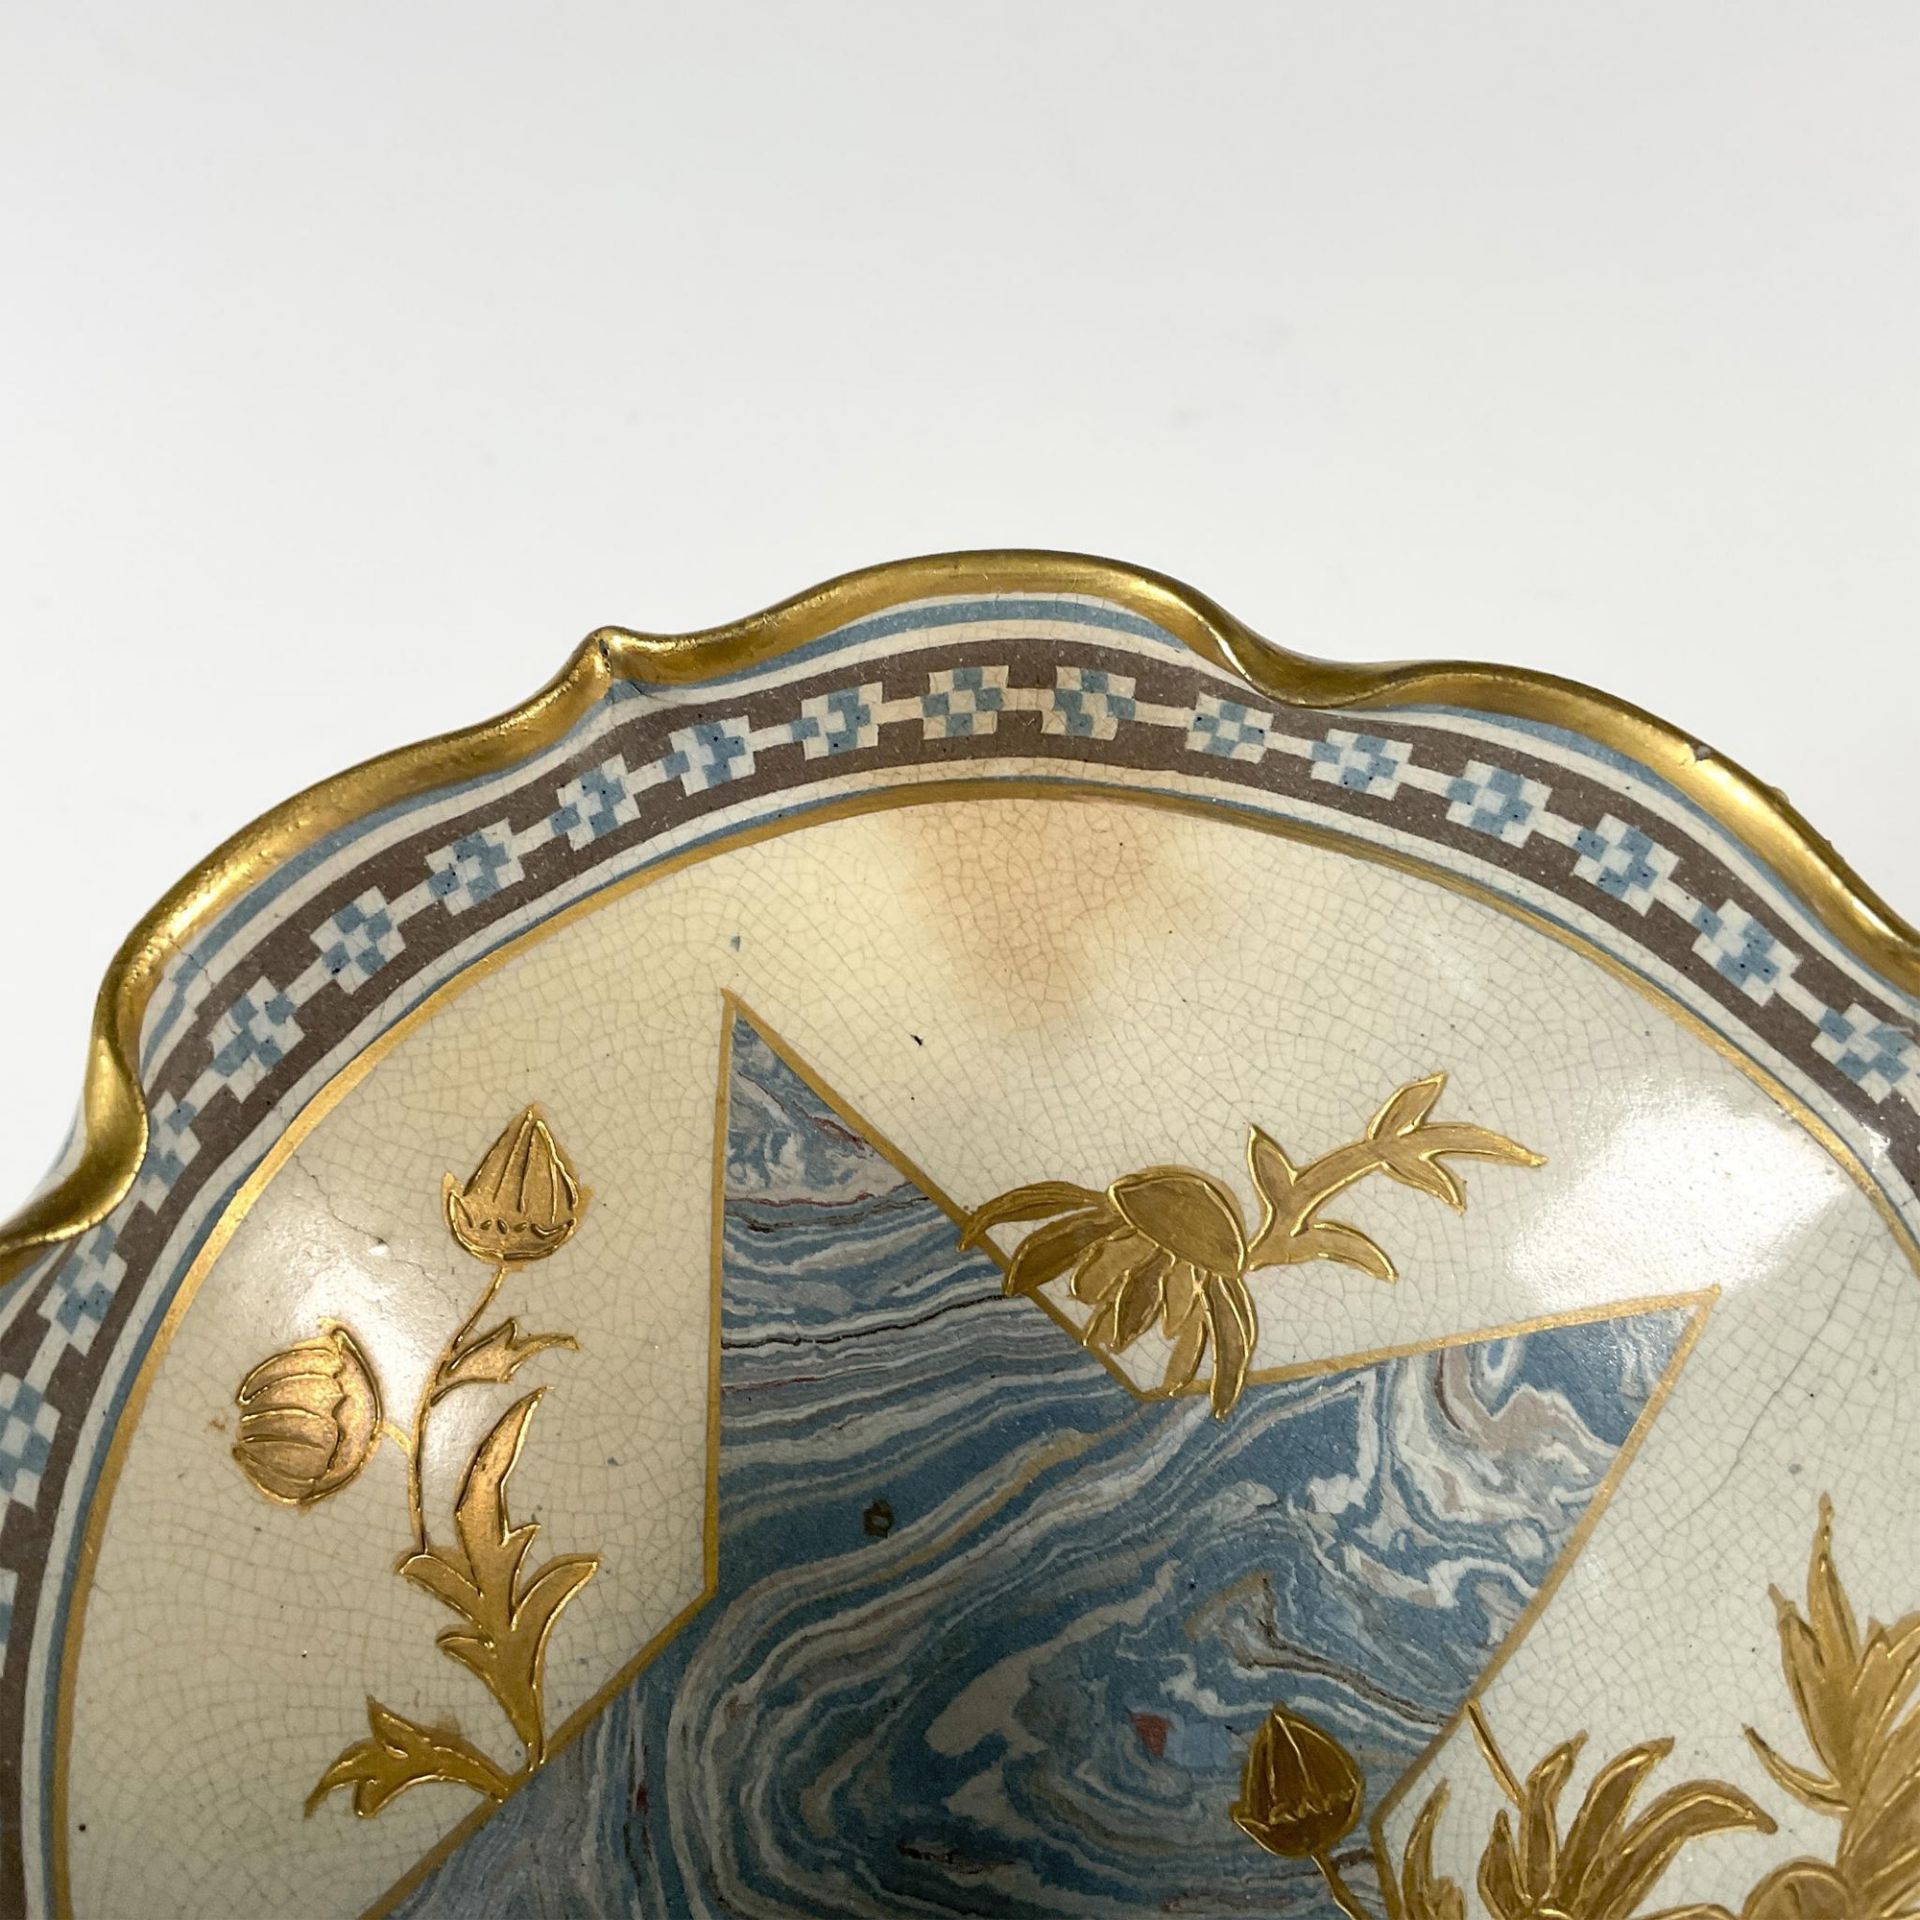 Doulton & Rix Marqueterie Pottery Compote - Image 5 of 5